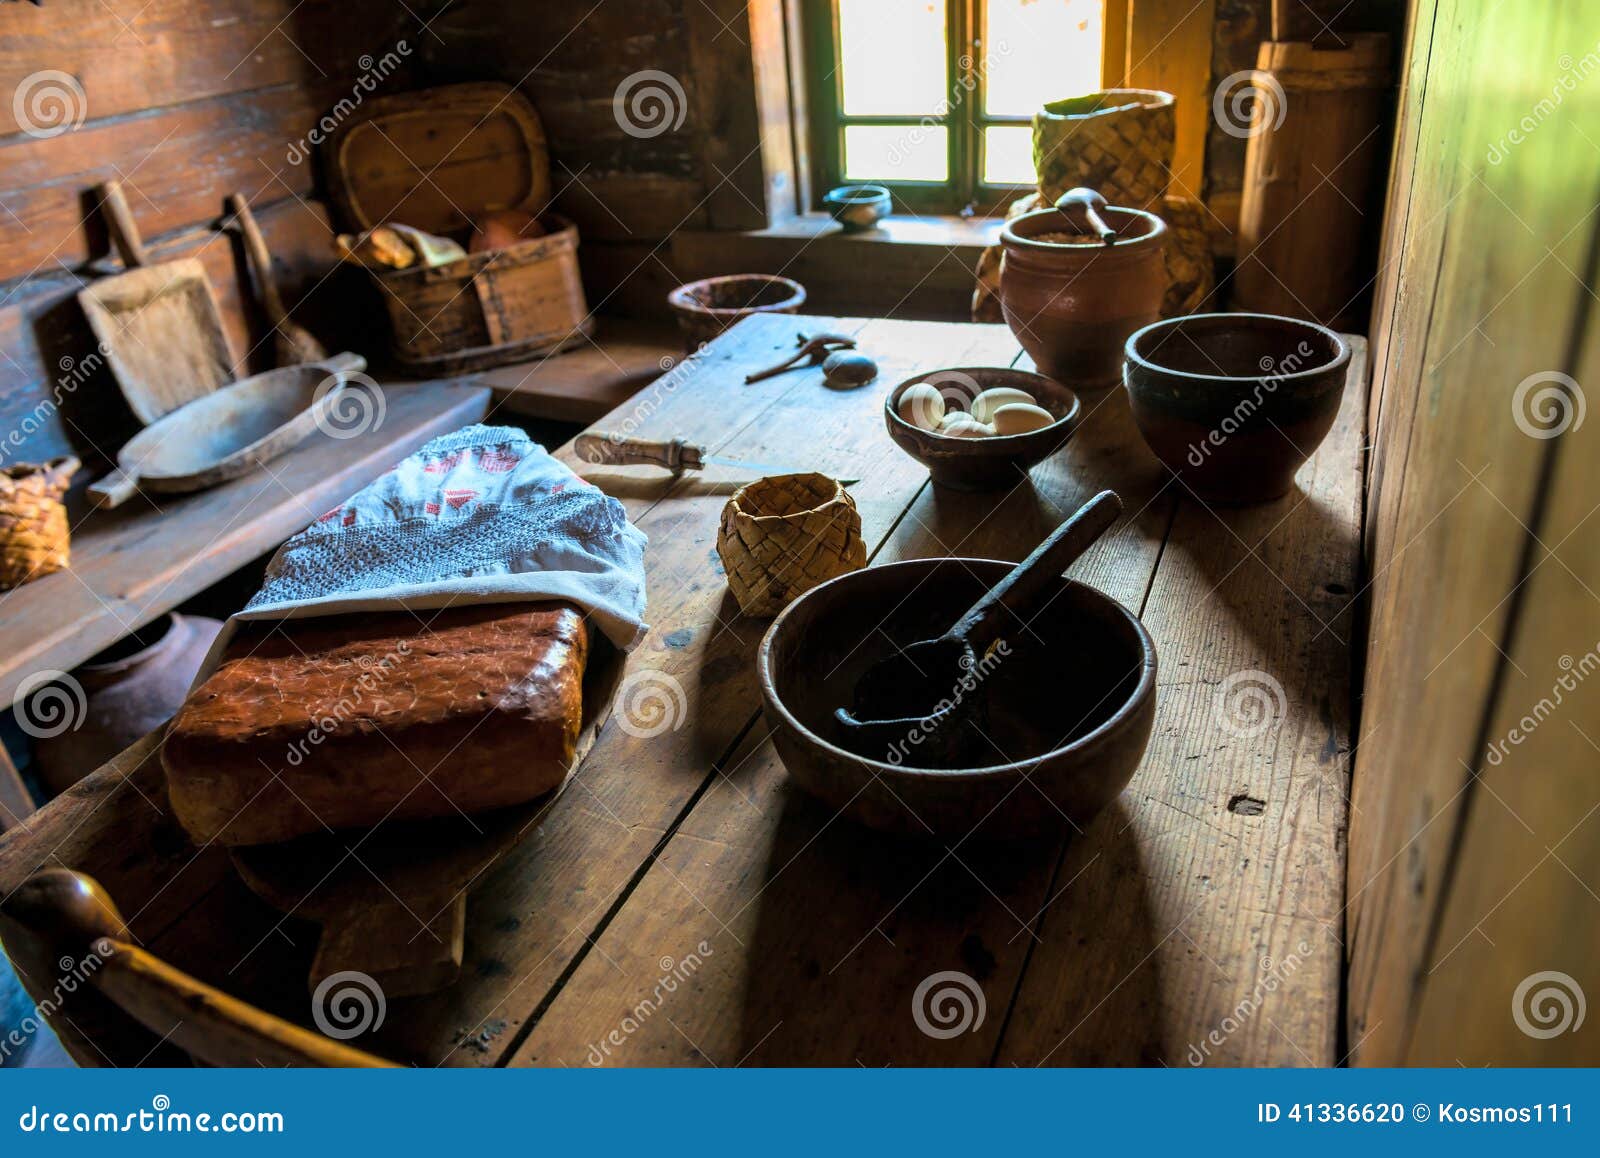 home kitchen interior in the middle ages